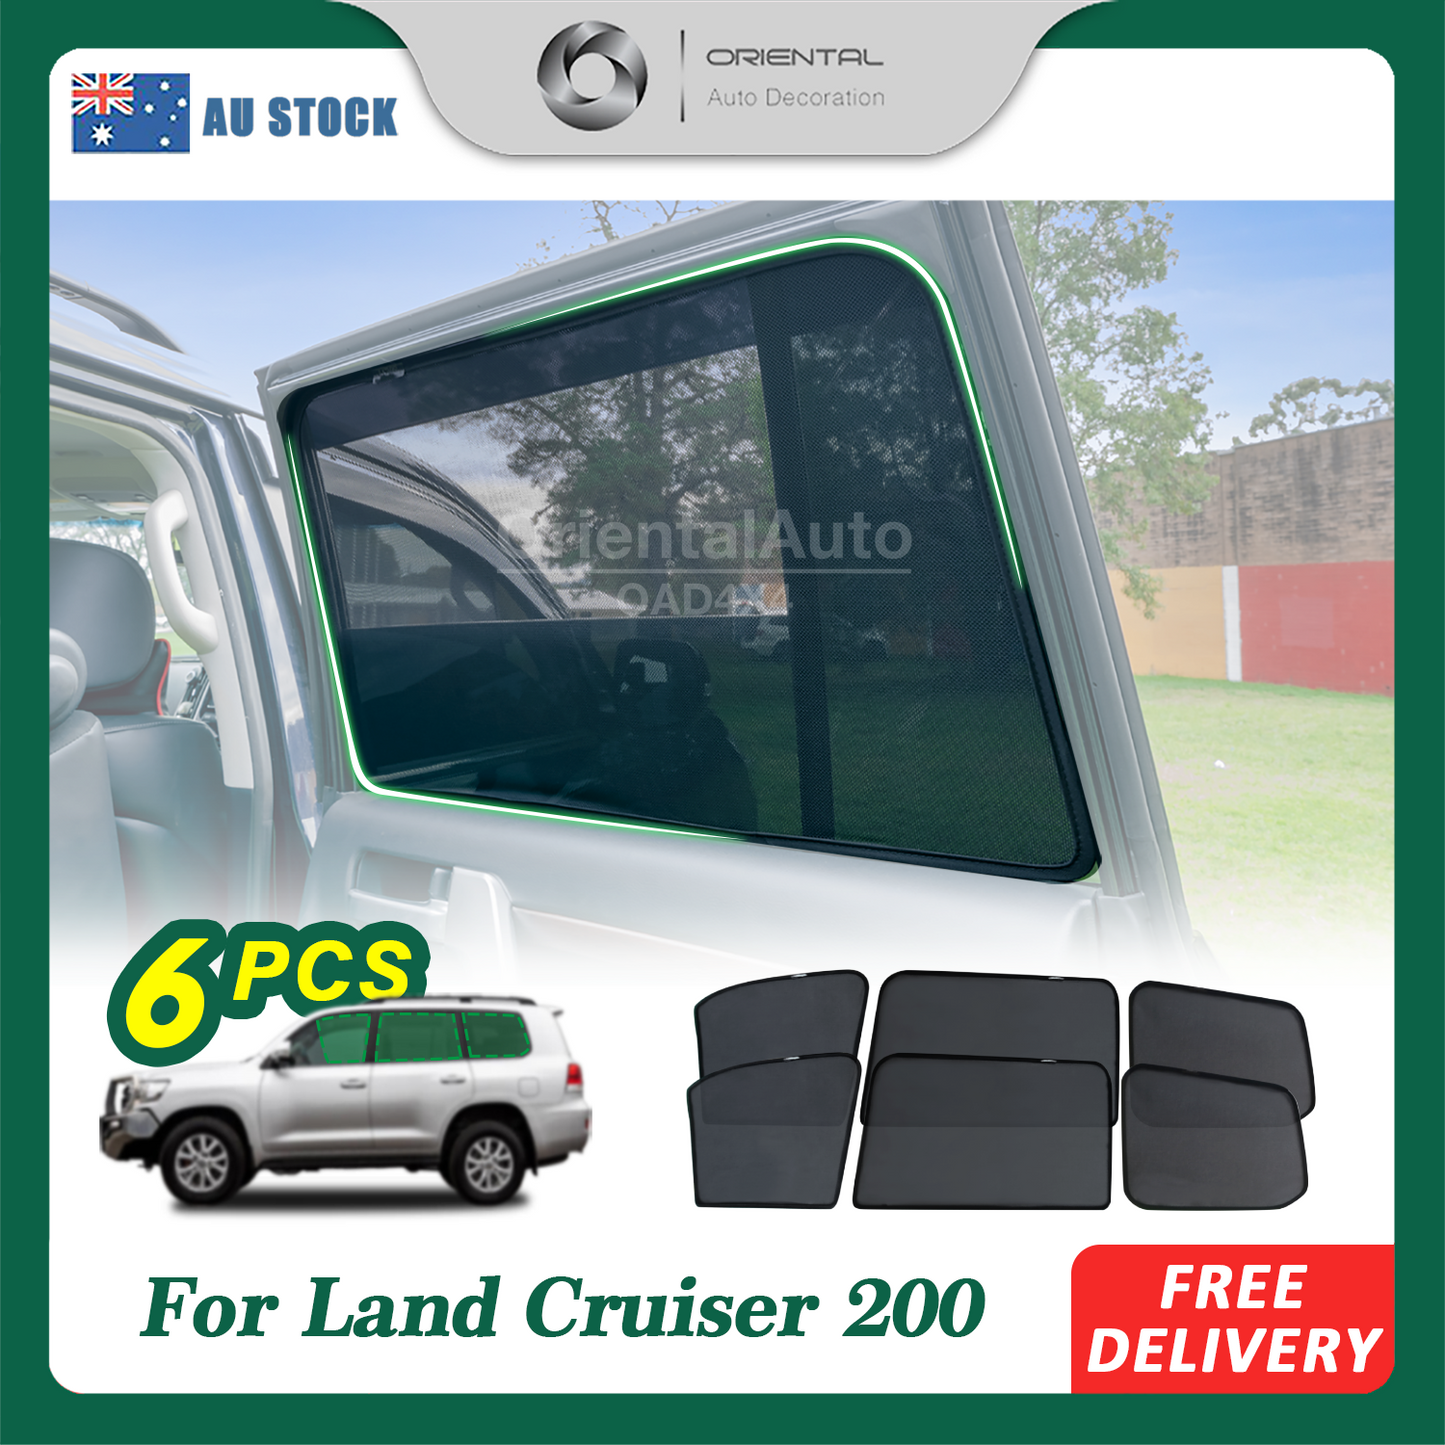 Pre-order 6PCS Magnetic Sun Shade for Toyota LandCruiser 200 Land Cruiser 200 LC200 2007-2021 Window Sun Shades UV Protection Mesh Cover